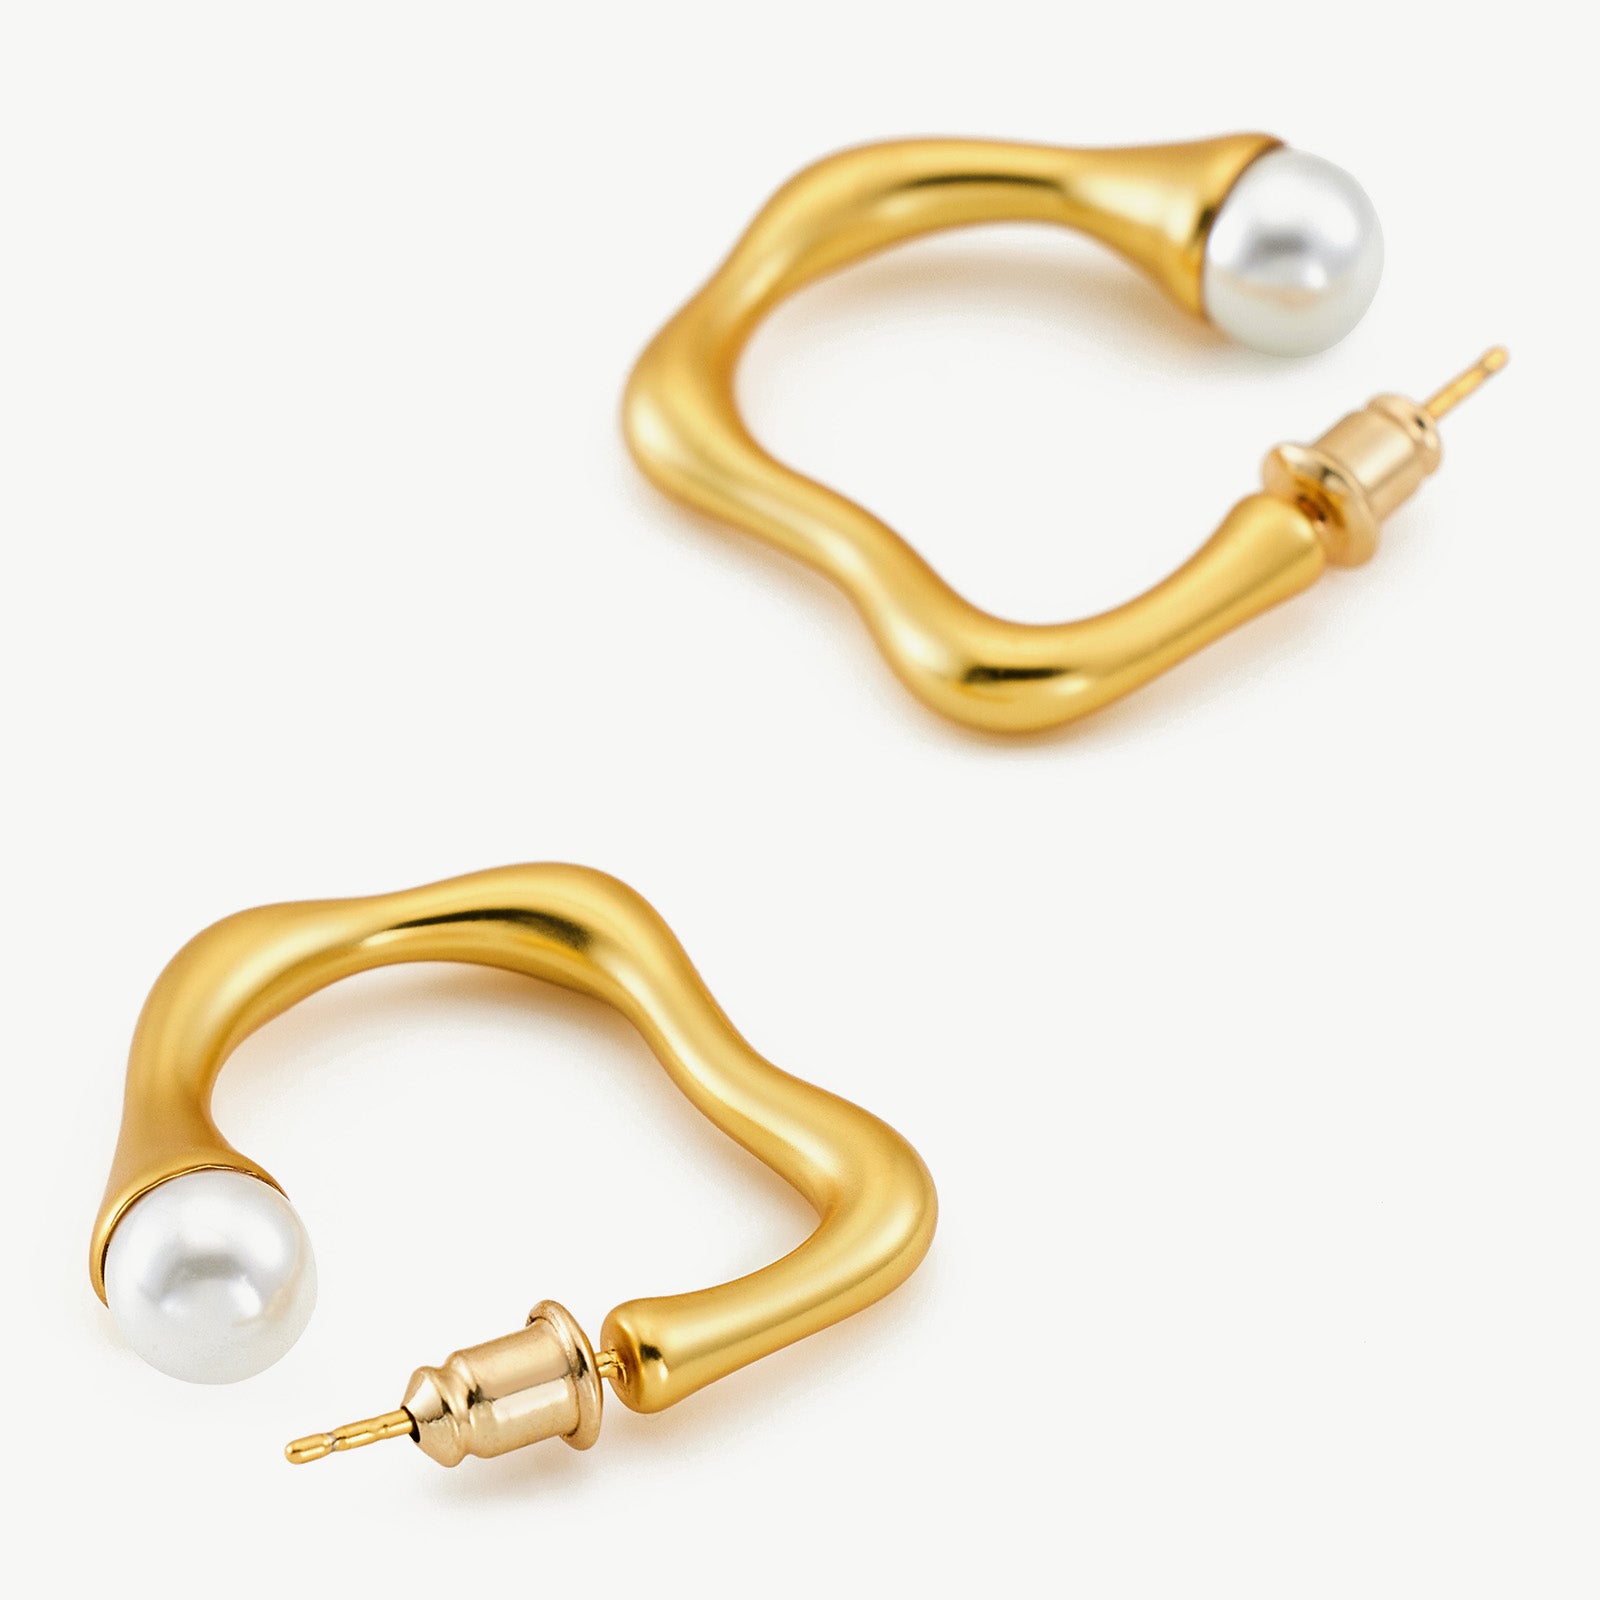 Large Hoop Earrings featuring a squiggle wavy pattern, a modern and artistic choice that showcases contemporary flair